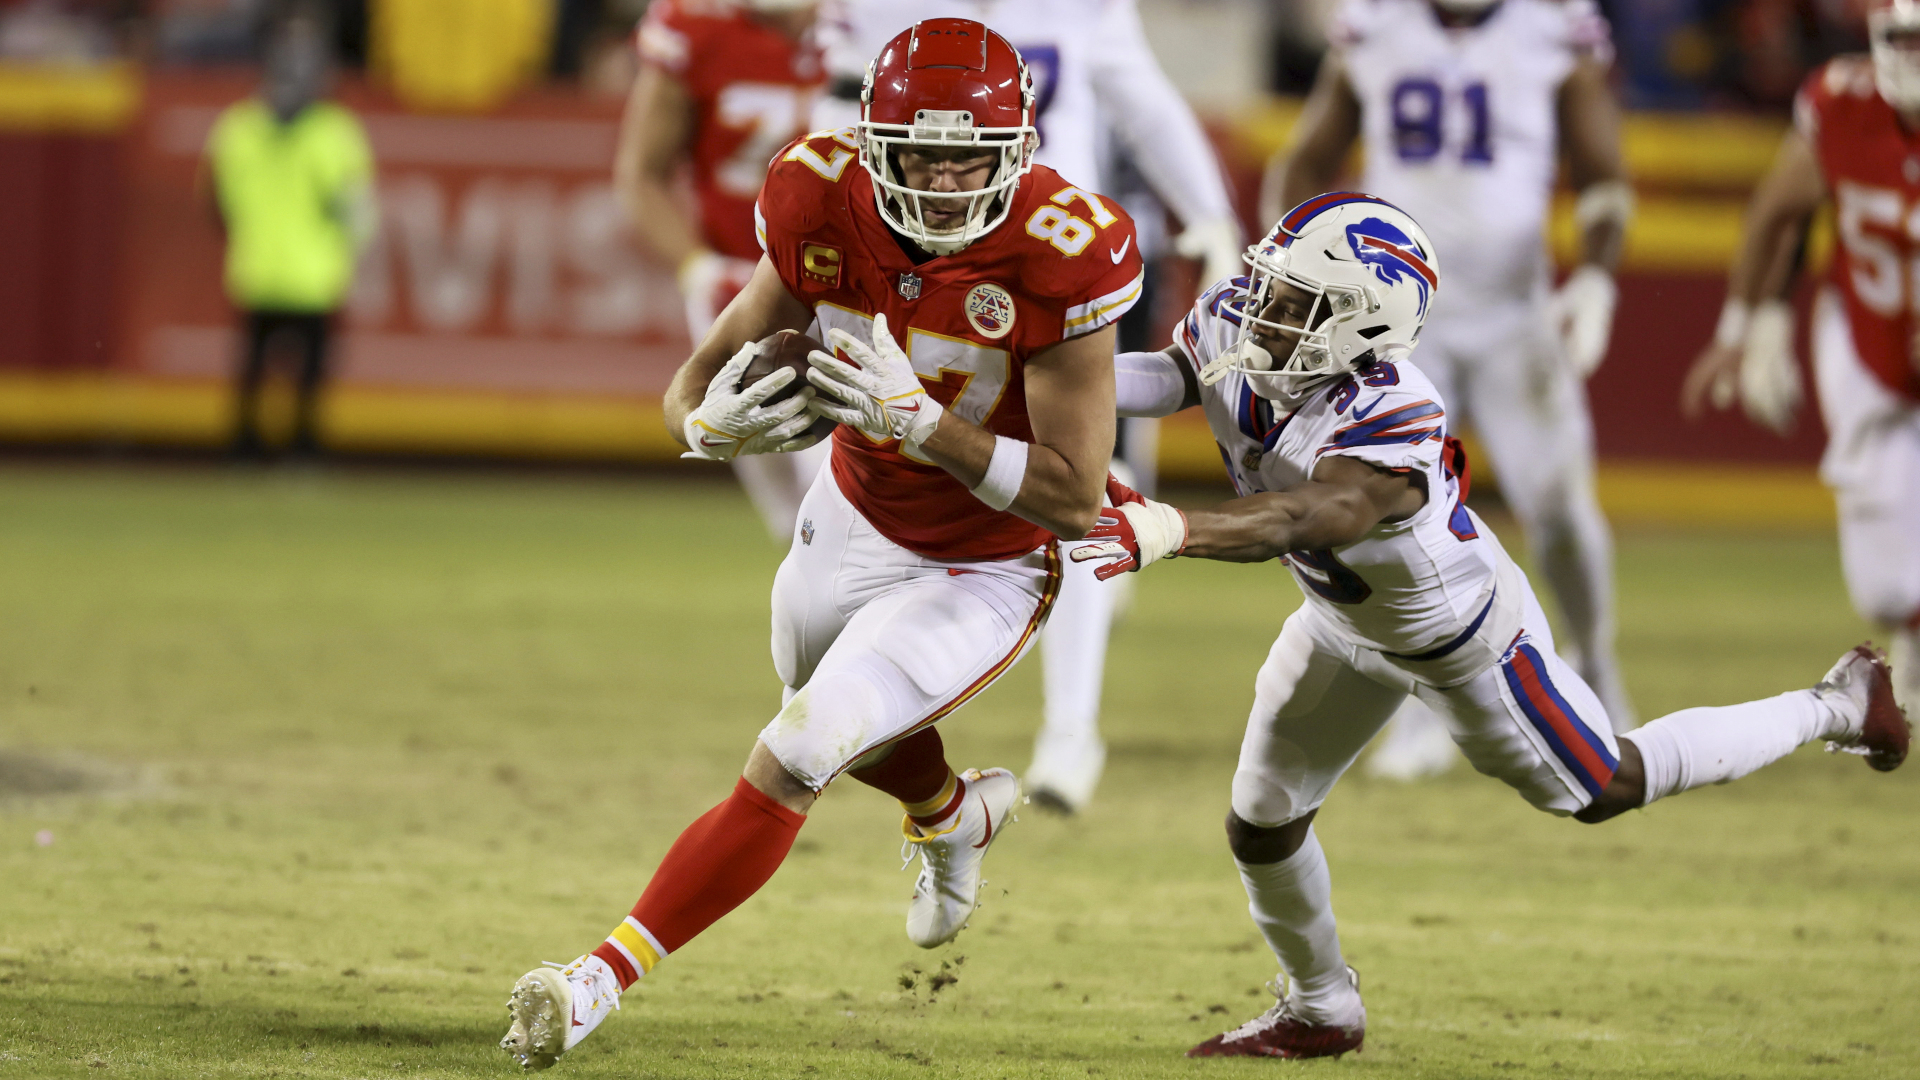 Bills vs Chiefs live stream: how to watch NFL online and on TV